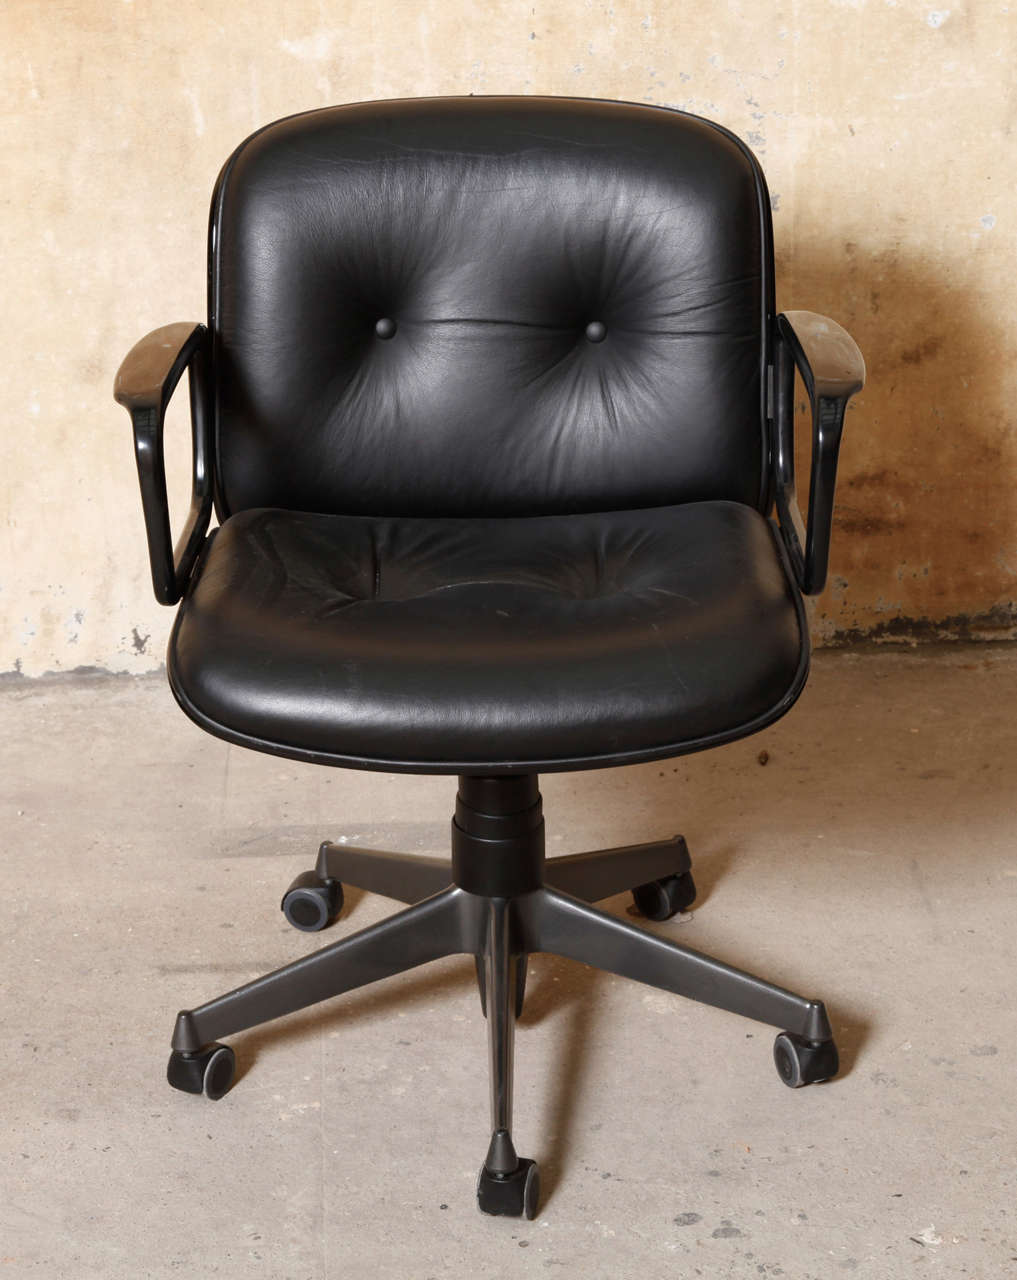 Desk Chair by Ico Parisi, circa 1970.
Seat and back in black plexi and black leather, adjustable lacquered metal base.
MIM Edition.
Height 84 width 63 cm,depth 53 cm.